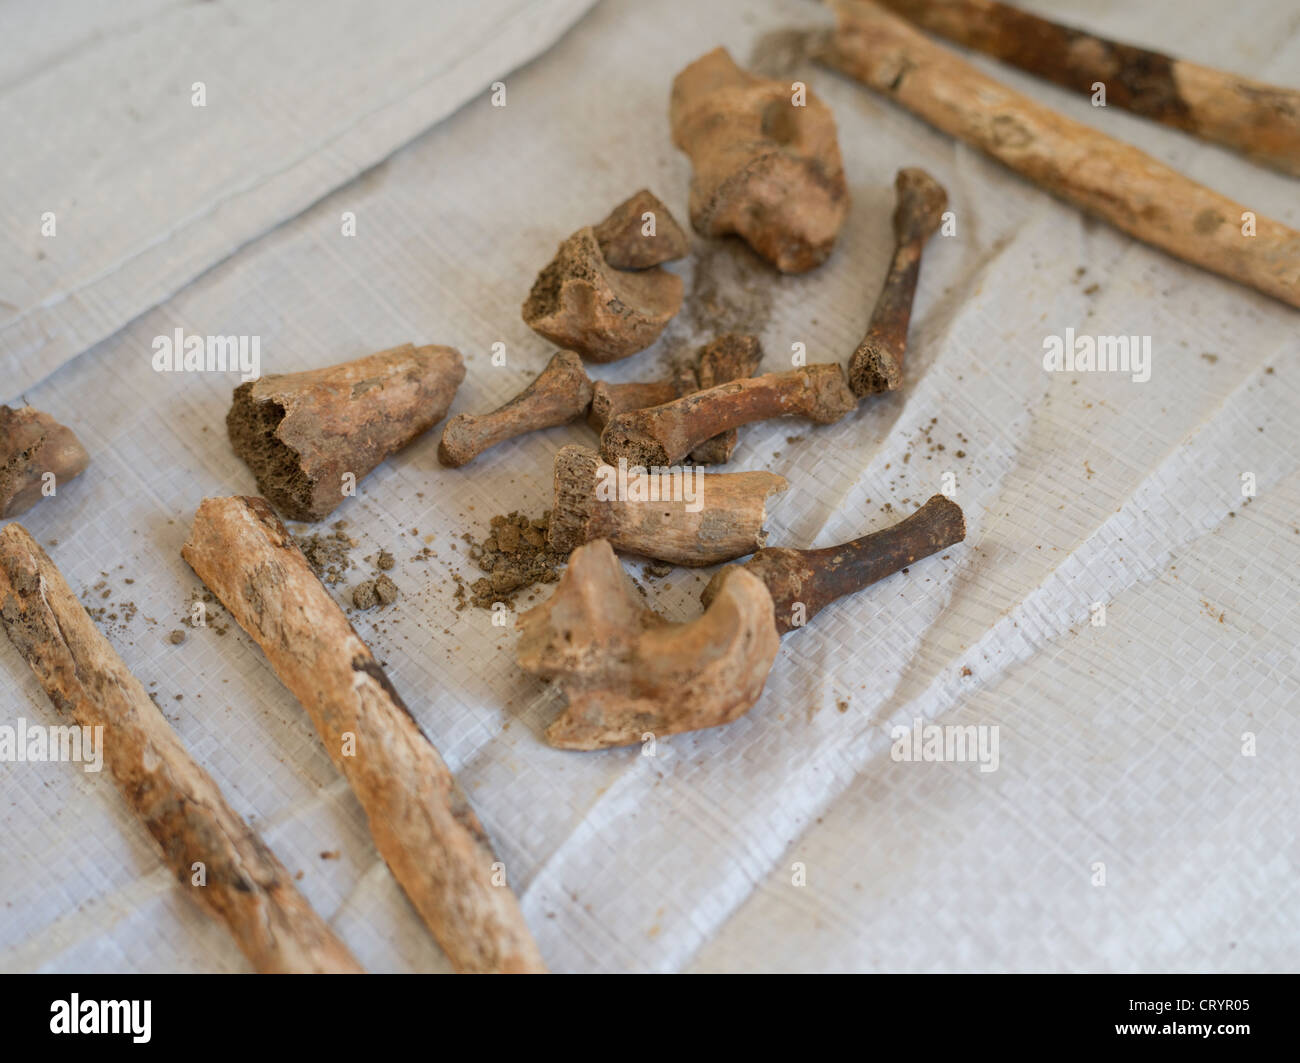 Bone fragments part of the human remains from WWII that are found during construction on Okinawa Stock Photo